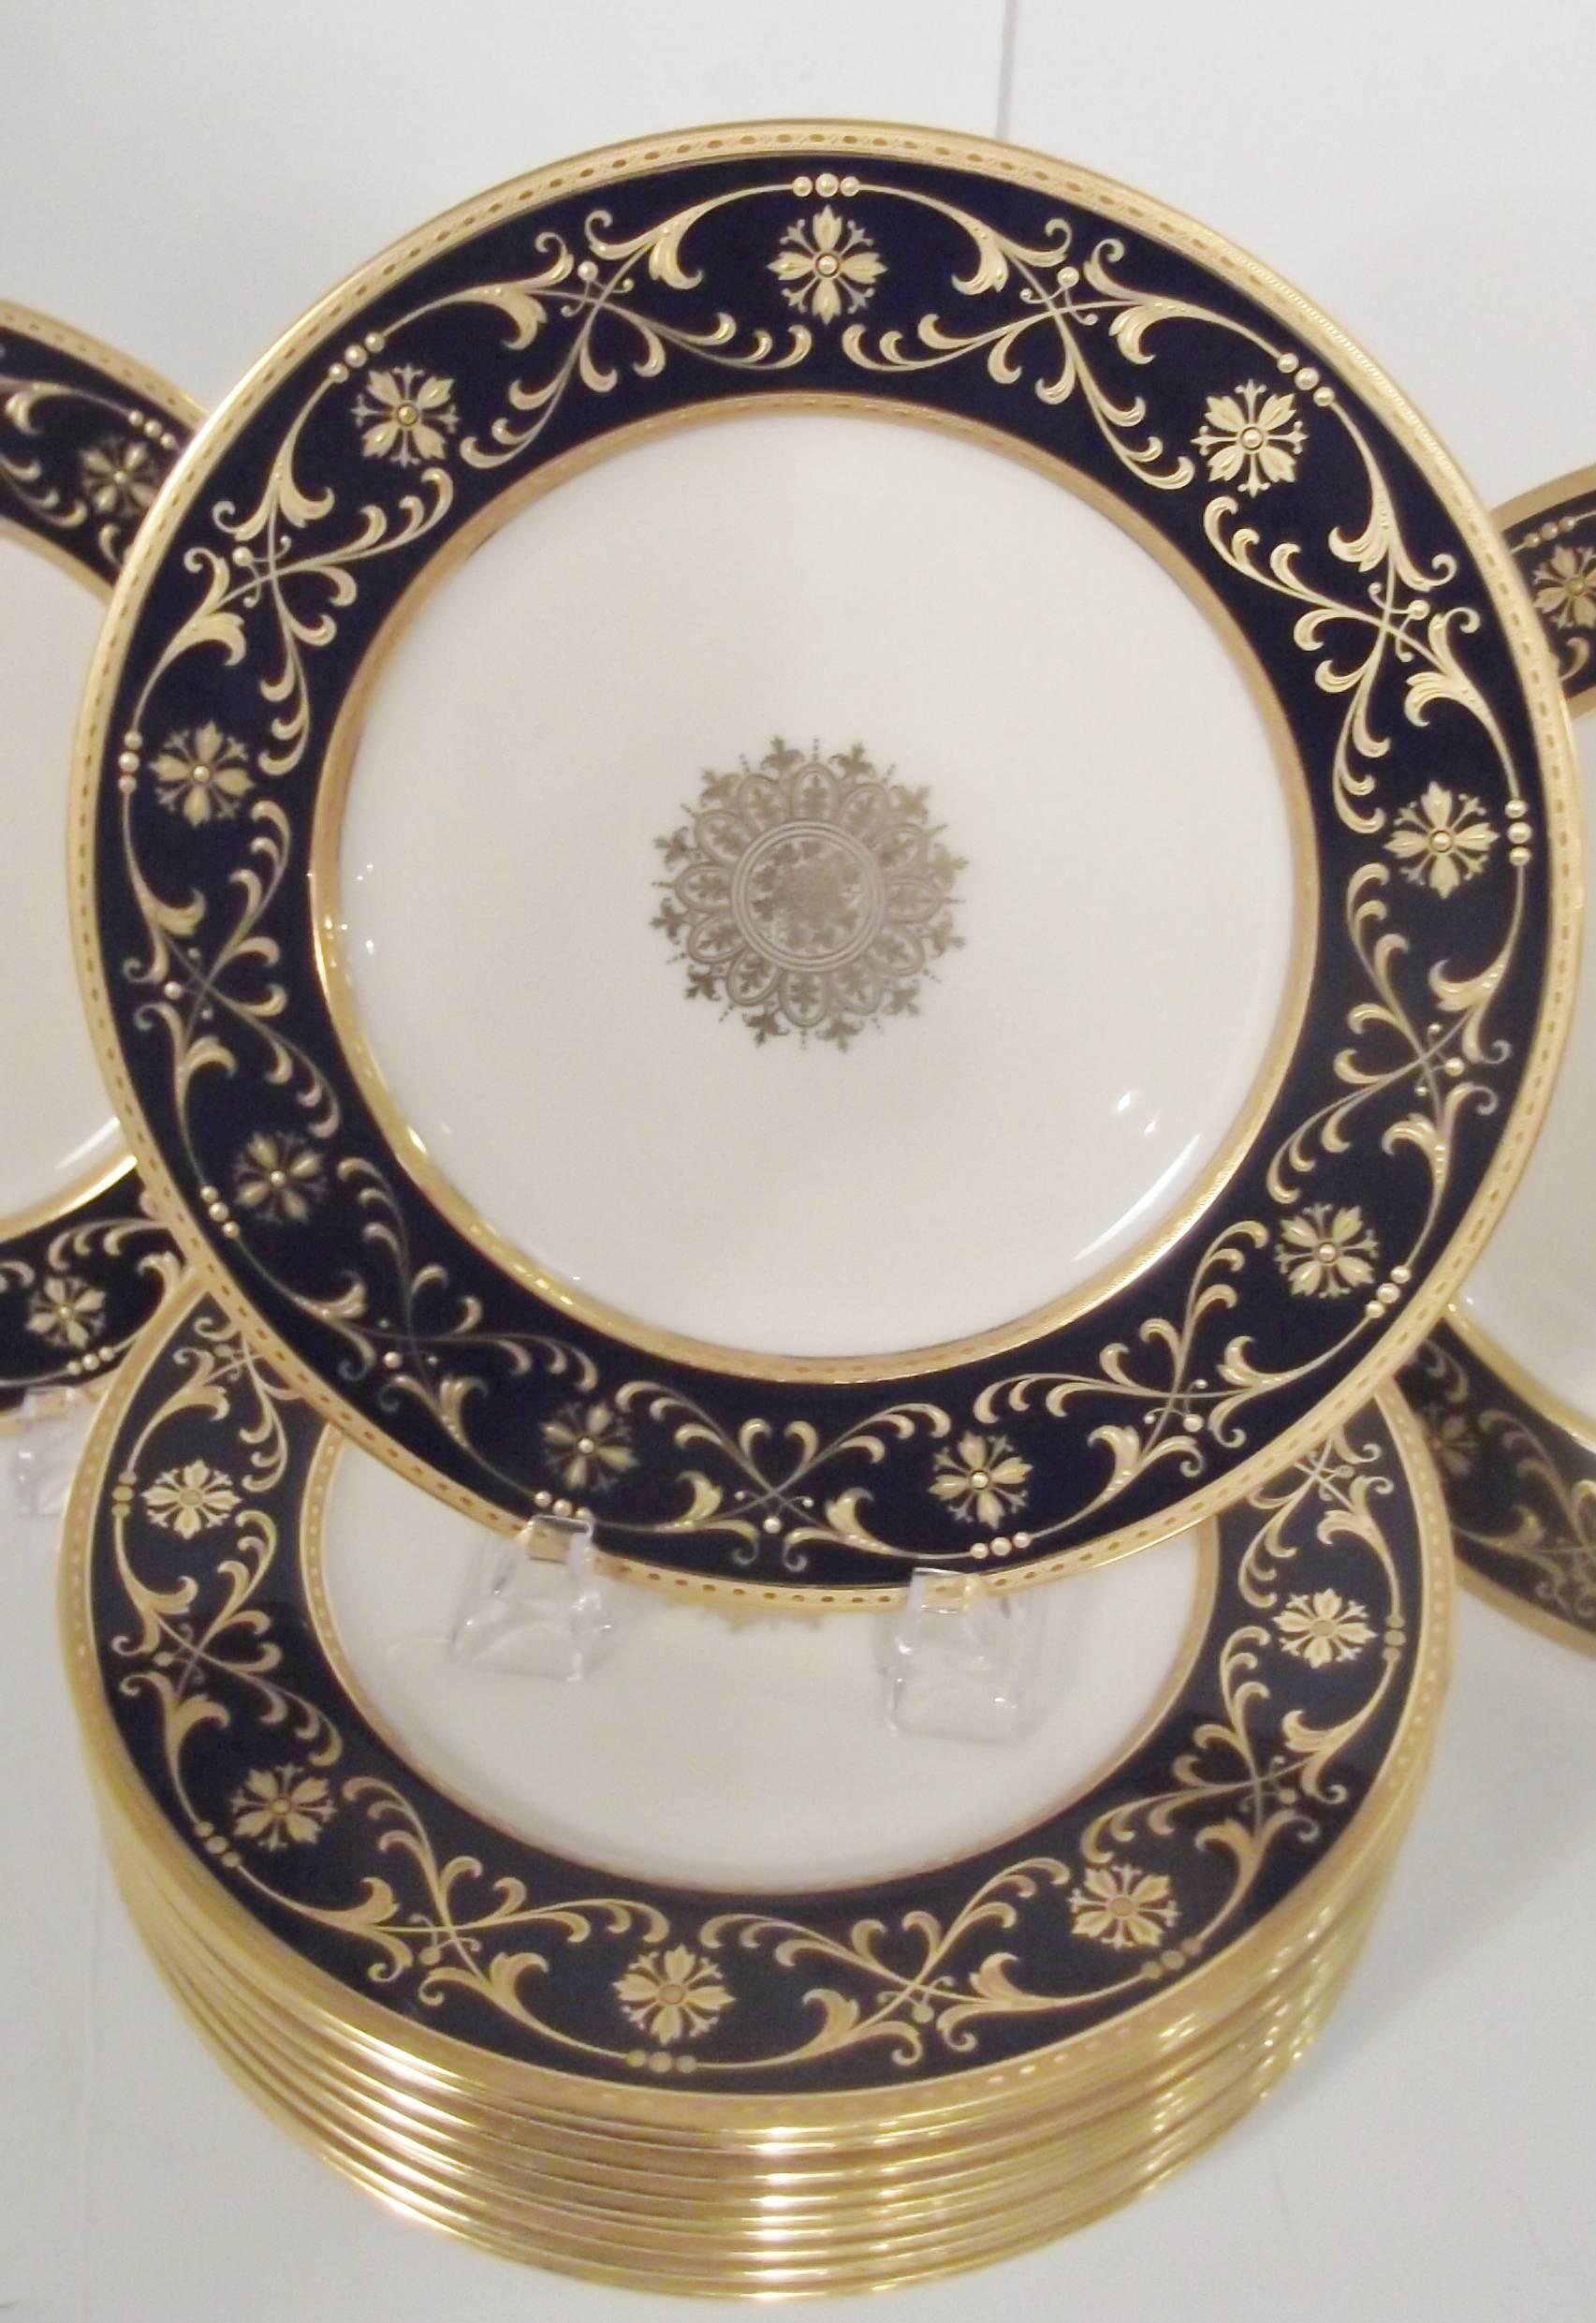 Elegant set of 12 cobalt and gilt border service plates.
Beautiful center medallions with raised textured gilding and inner and outer gold rings. Made by Lenox with the early green mark. These plates have a year mark of 1937 along with the